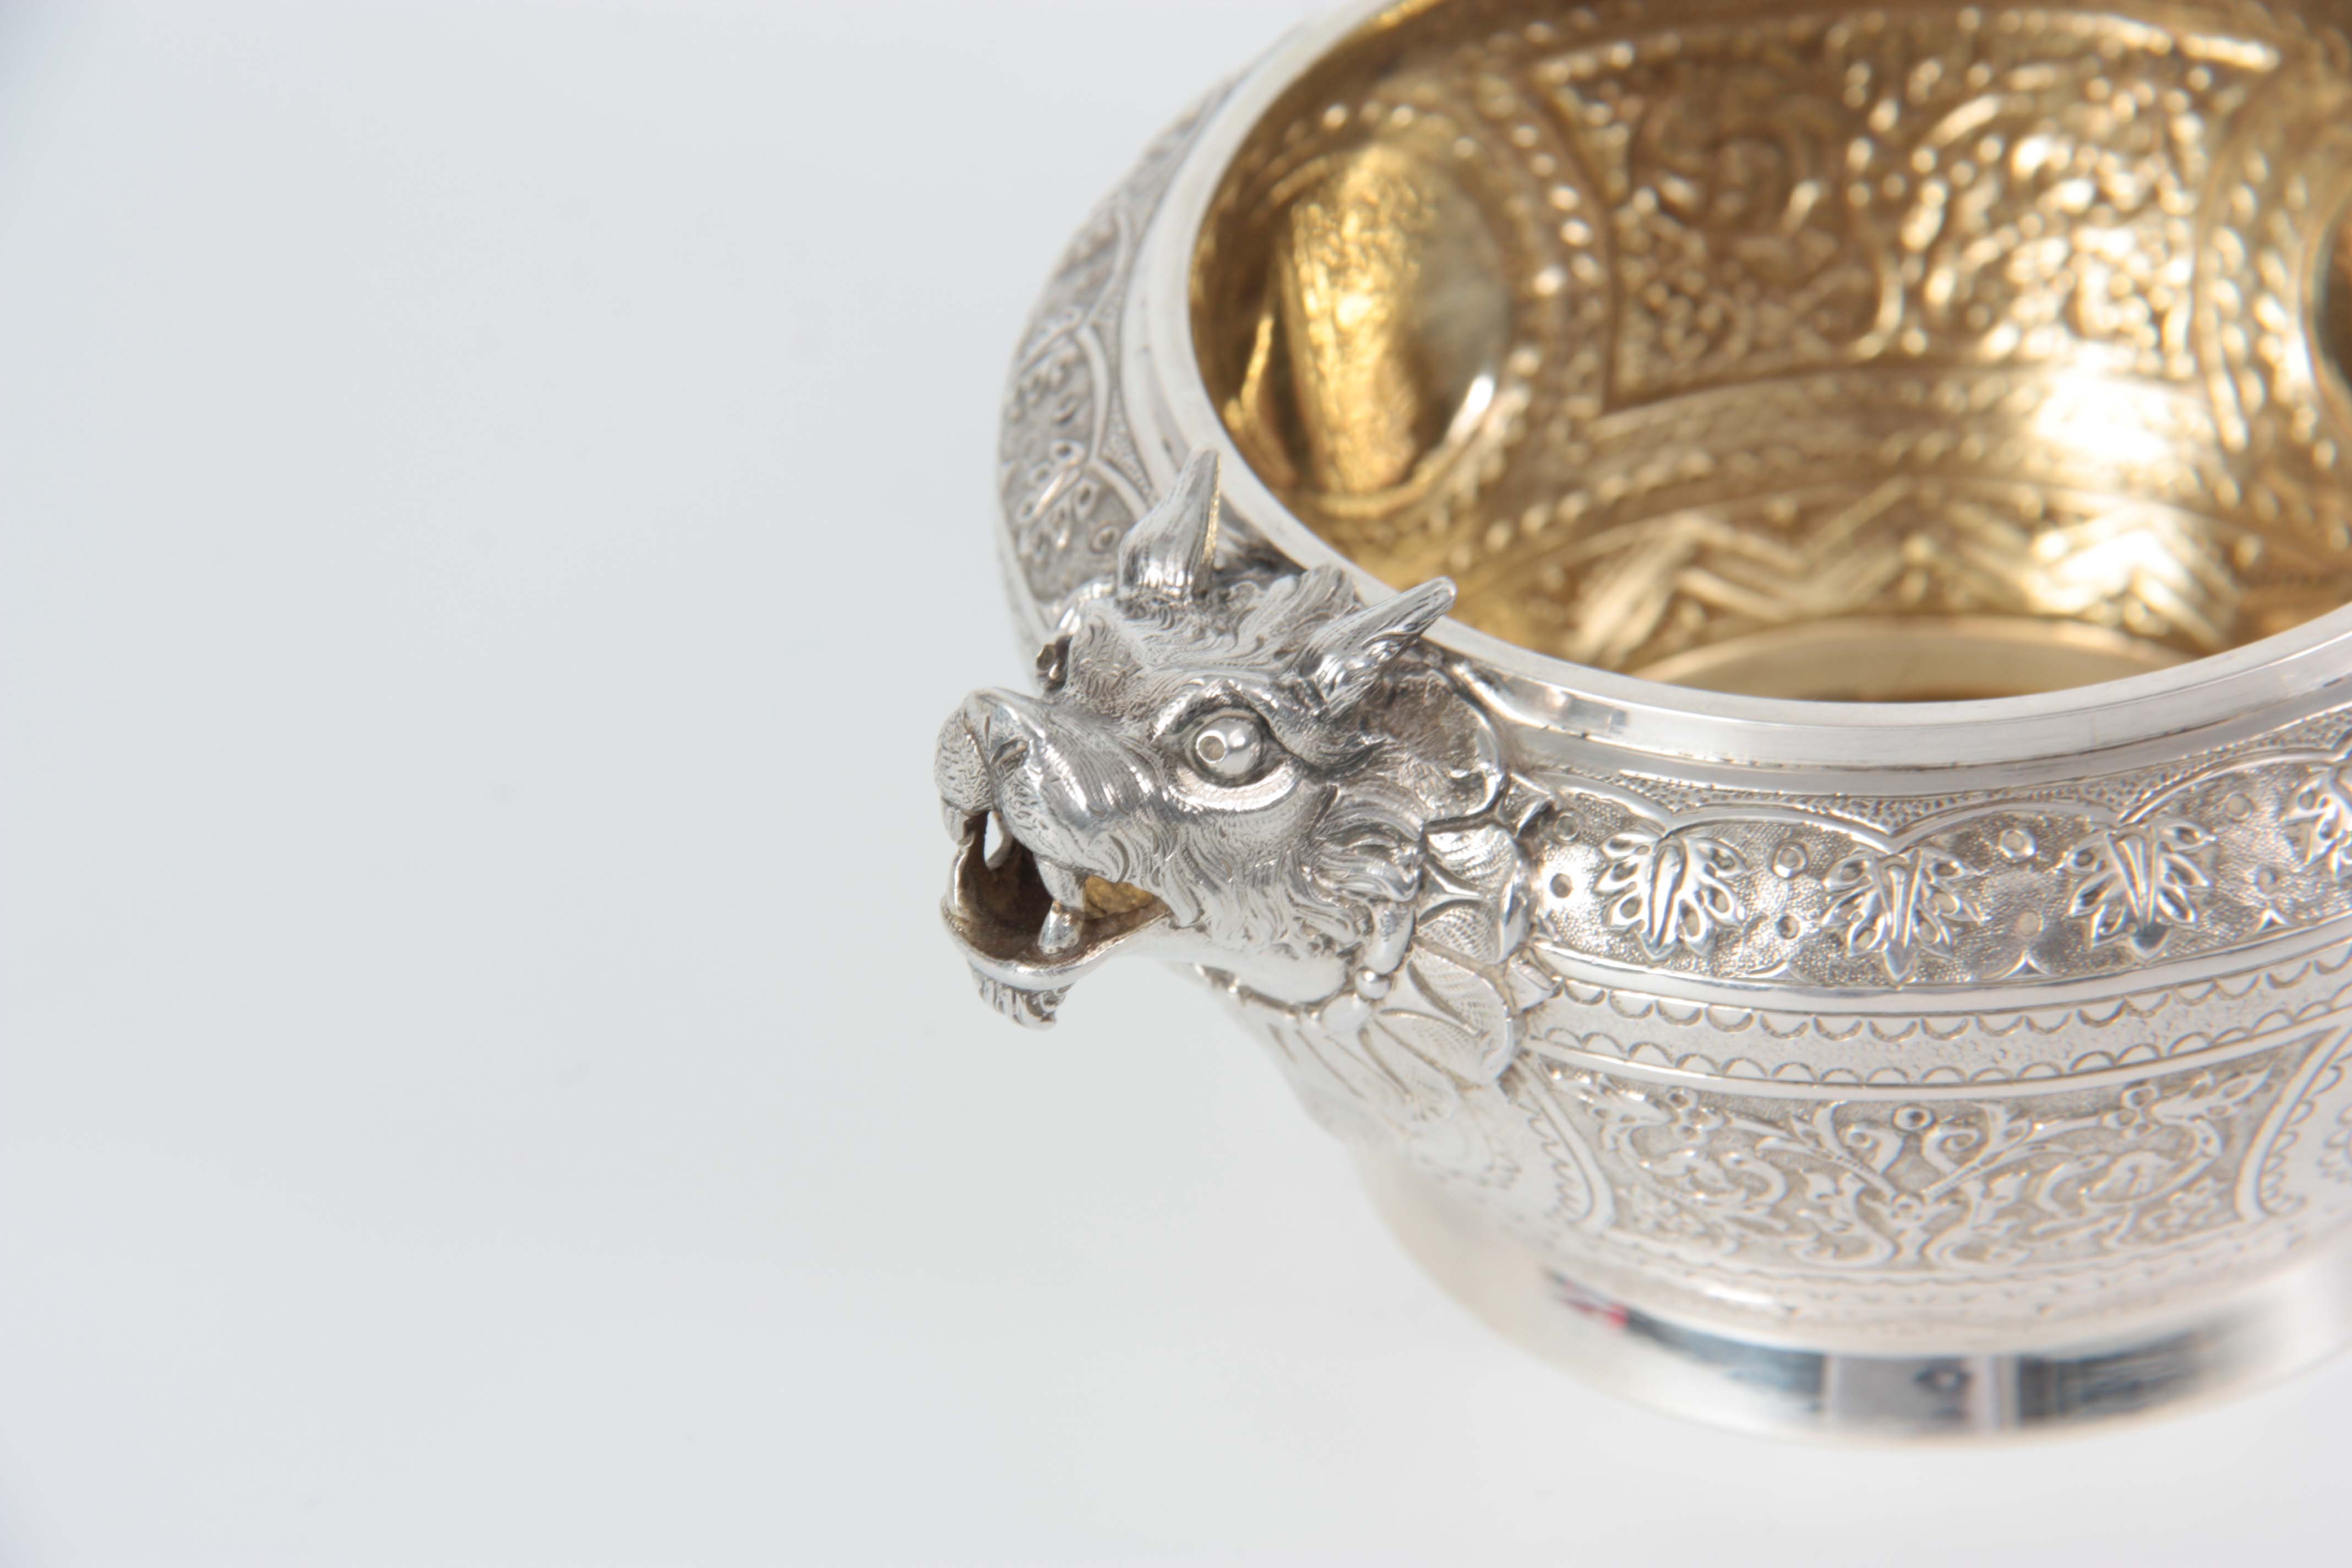 A VICTORIAN SILVER AND GILT CREAM JUG AND SUGAR BOWL having relief scroll-work panels and fine - Image 7 of 7